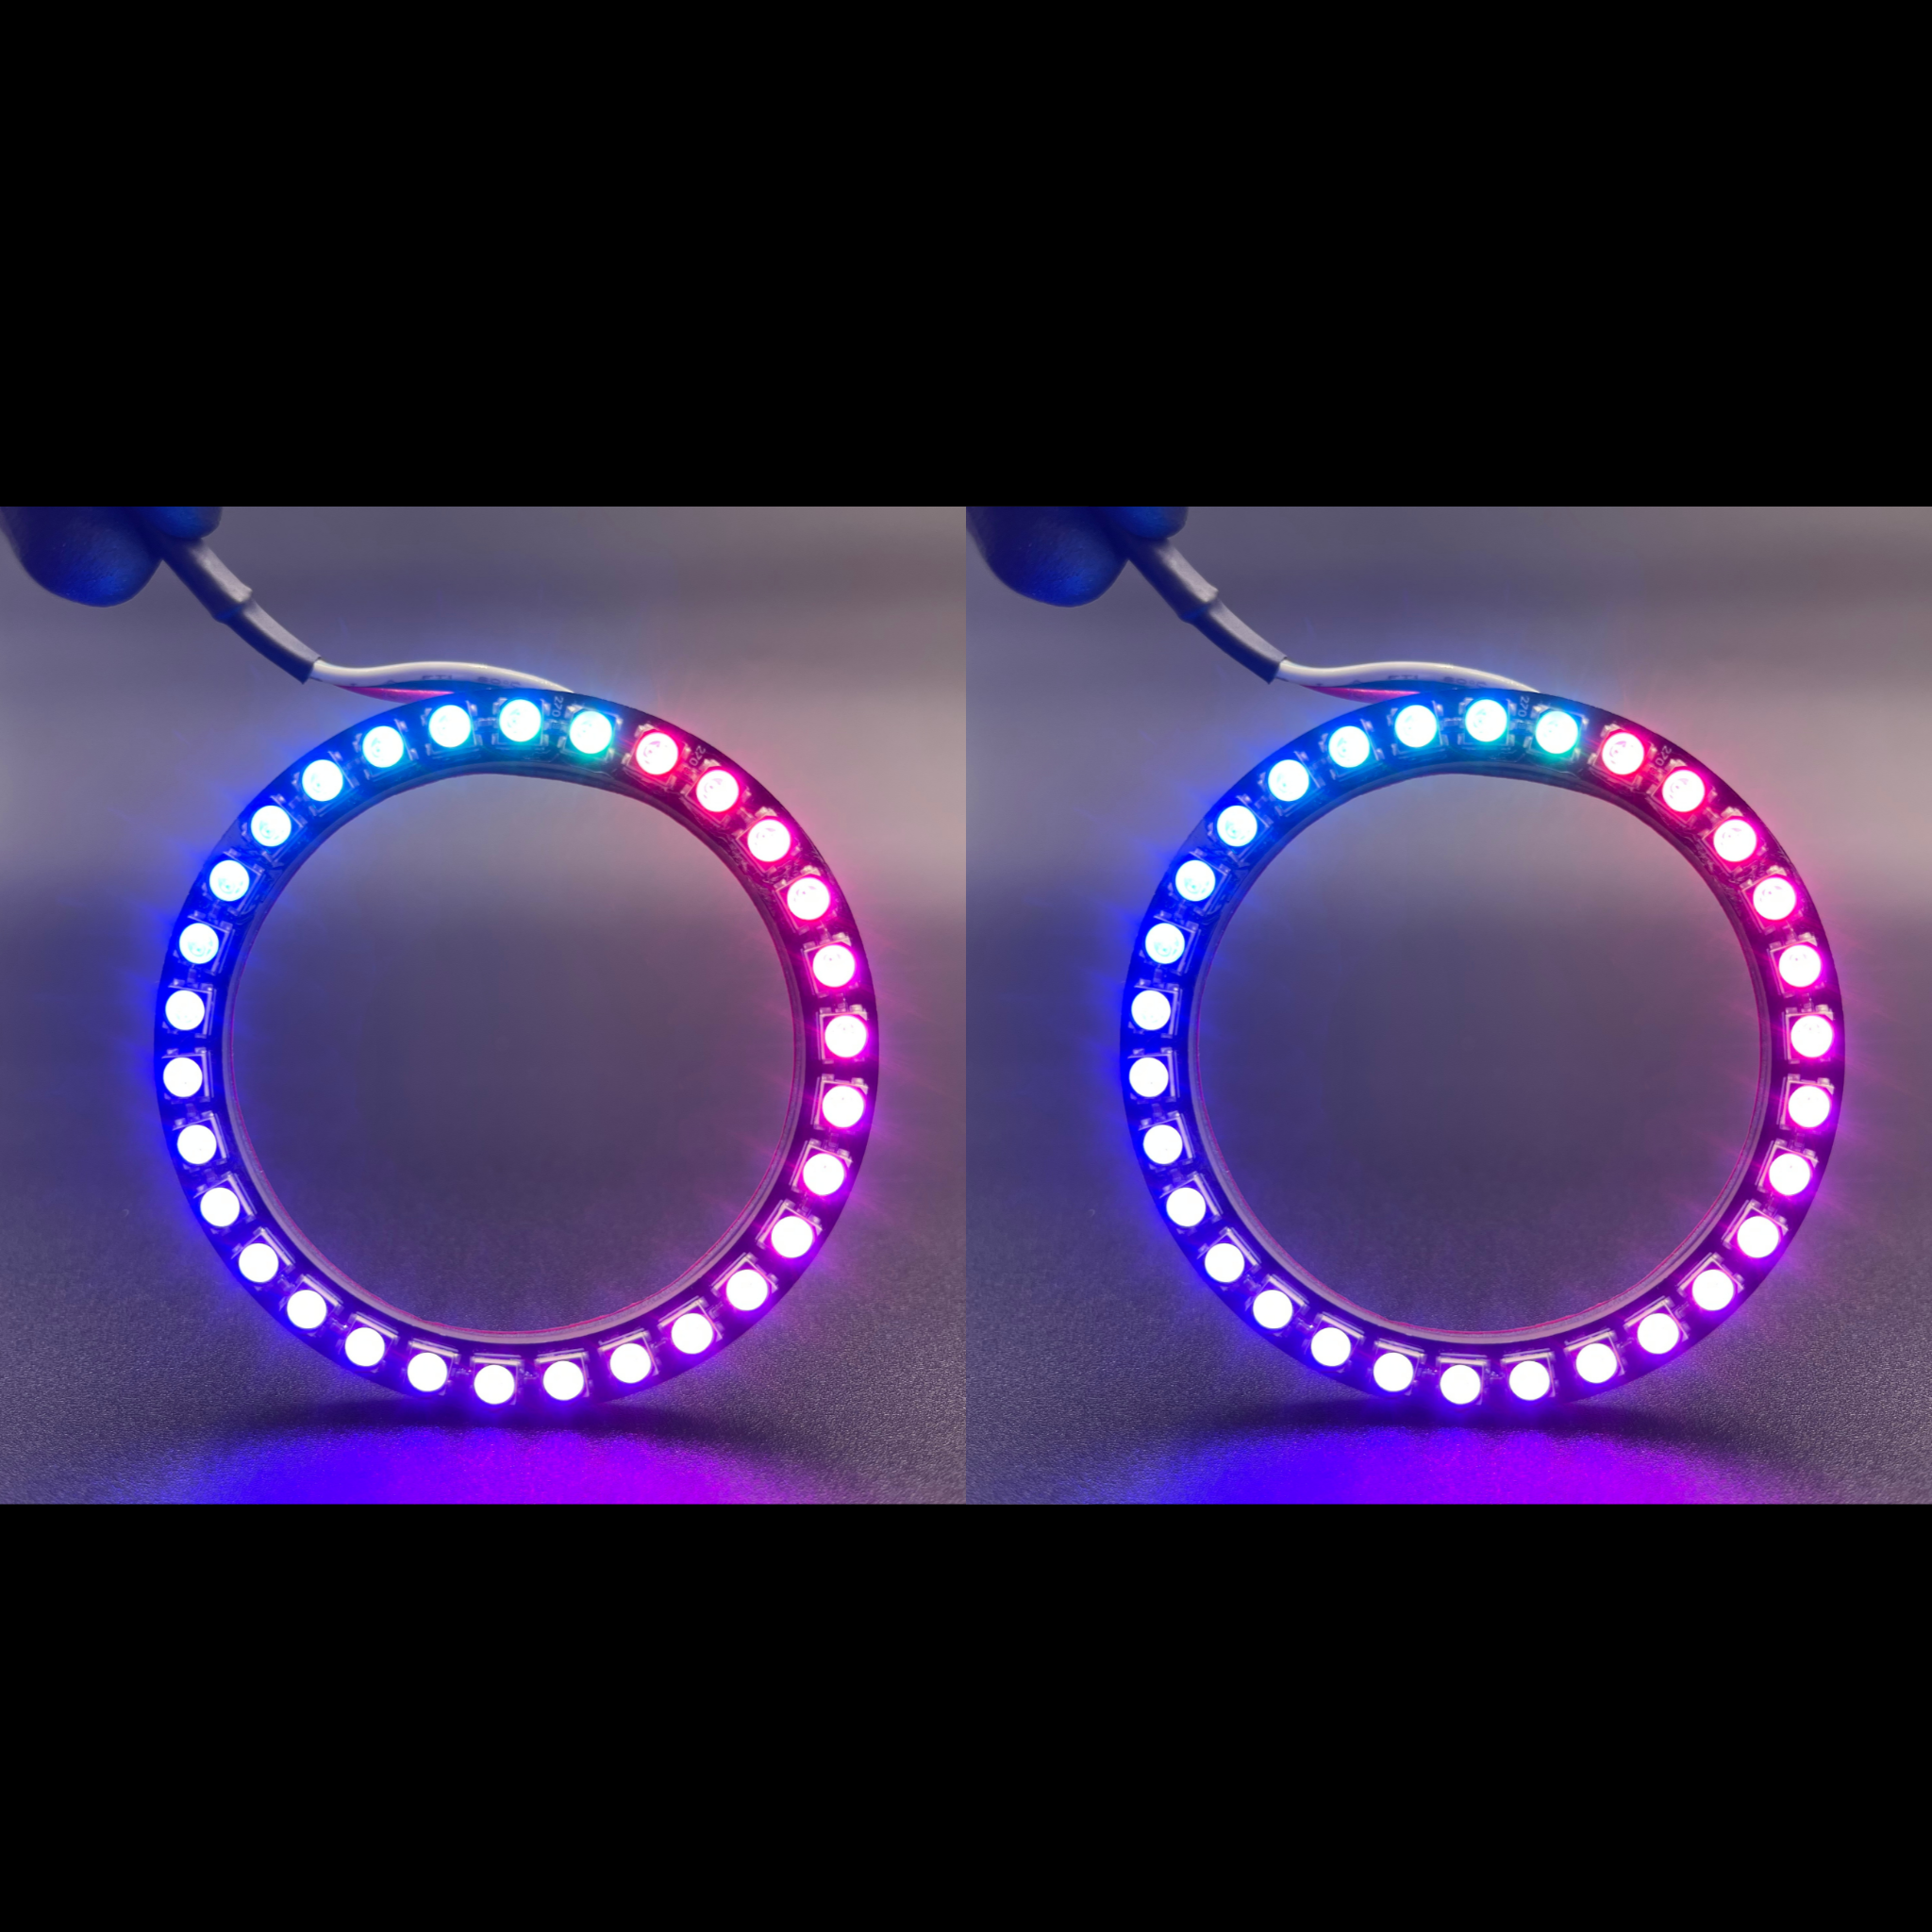 1994-2004 Ford F-250 Multicolor Halo Kit - RGB Halo Kits Multicolor Flow Series Color Chasing RGBWA LED headlight kit Oracle Lighting Trendz OneUpLighting Morimoto theretrofitsource AutoLEDTech Diode Dynamics